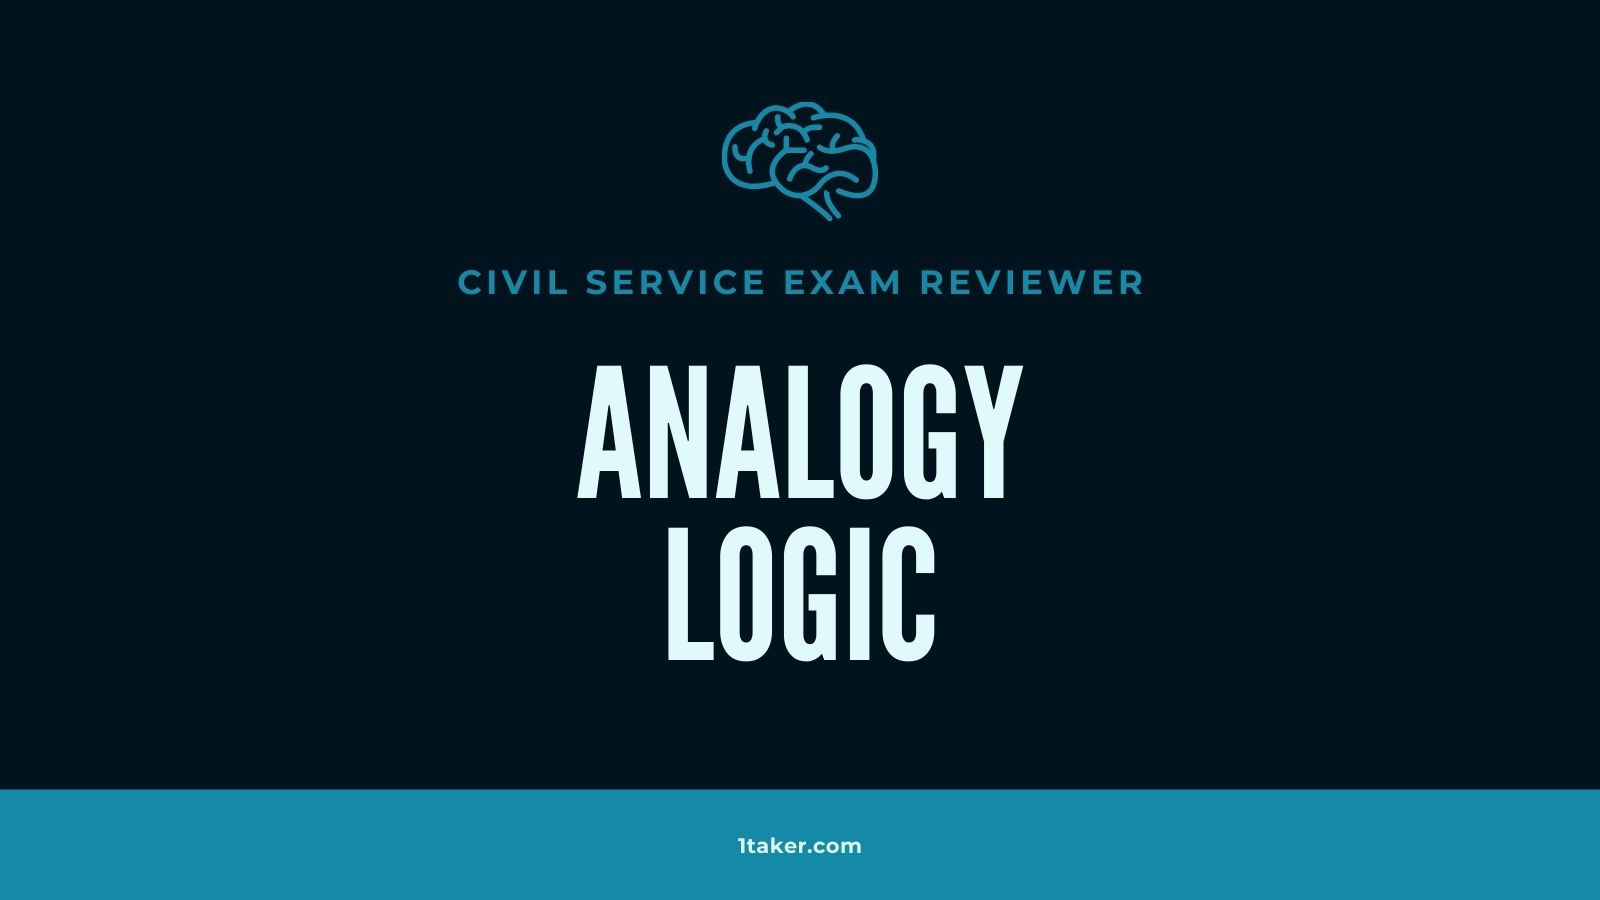 analogy and logic test questions civil service exam